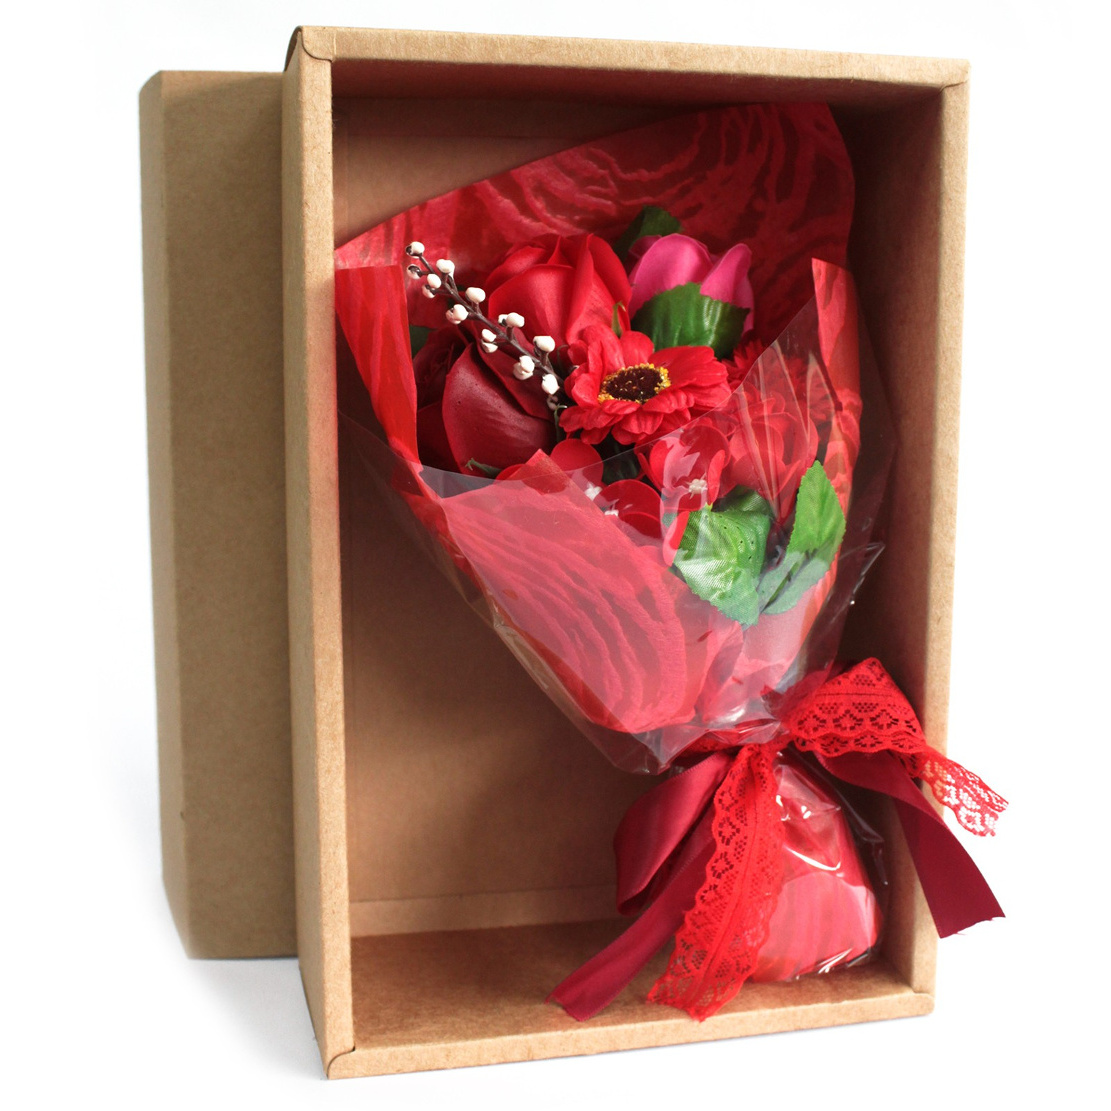 Boxed Soap Flower Bouquet - Red